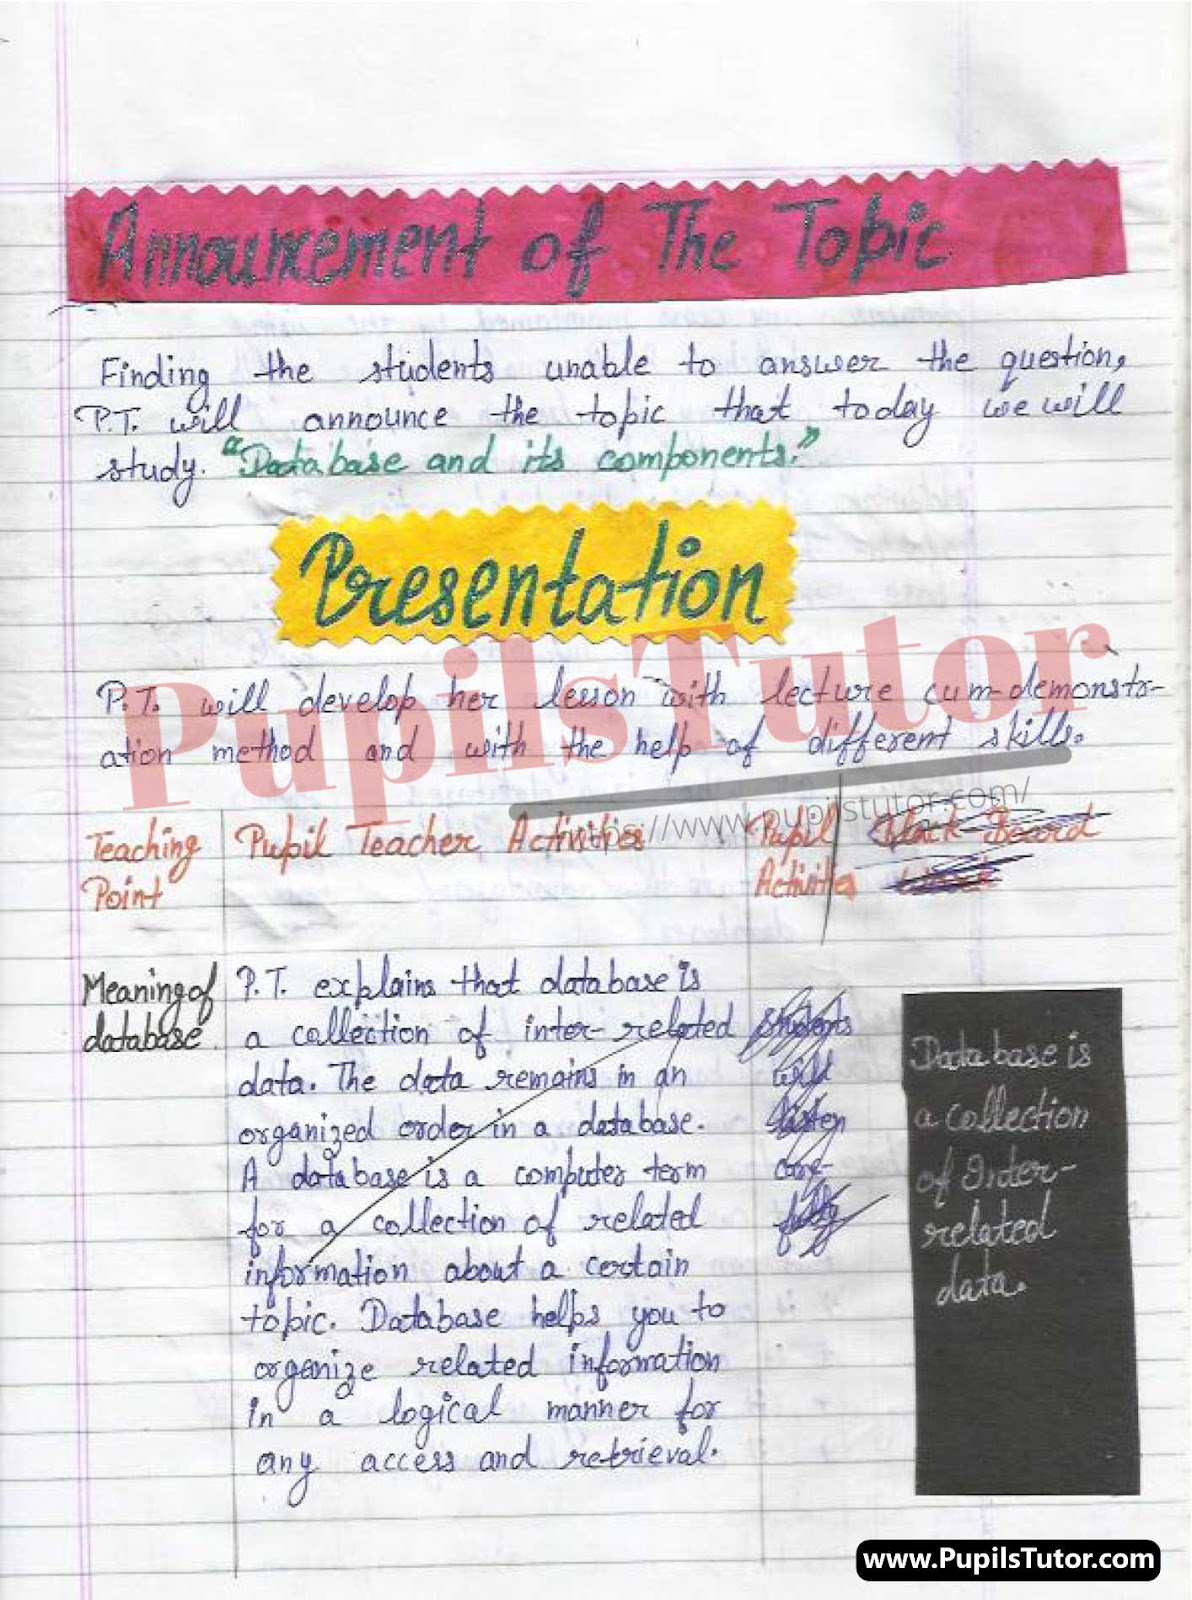 Computer Lesson Plan On Computer Database For Class/Grade 9 To 12 For CBSE NCERT School And College Teachers  – (Page And Image Number 3) – www.pupilstutor.com